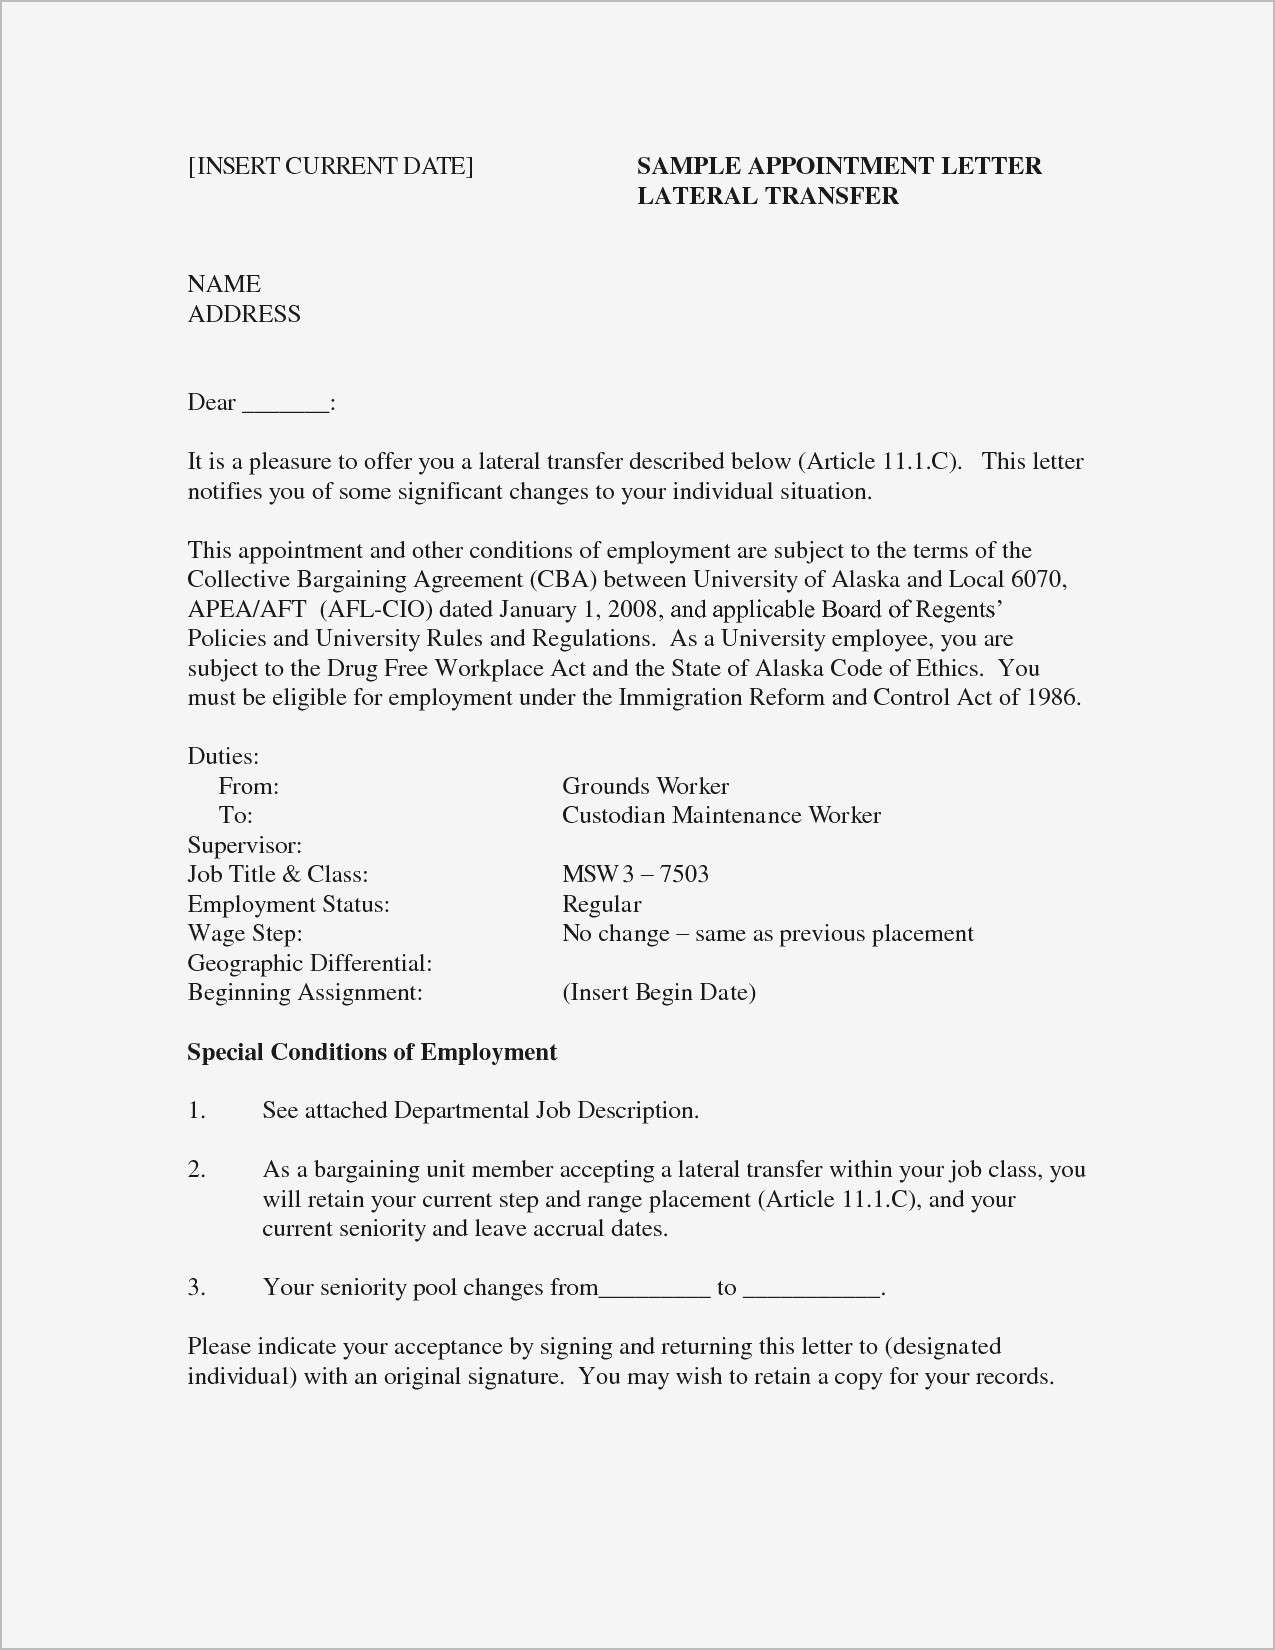 Jimmy Sweeney Cover Letter Template - 15 Carry Jimmy Sweeney Cover Letter Examples Ringer Mxqzuml